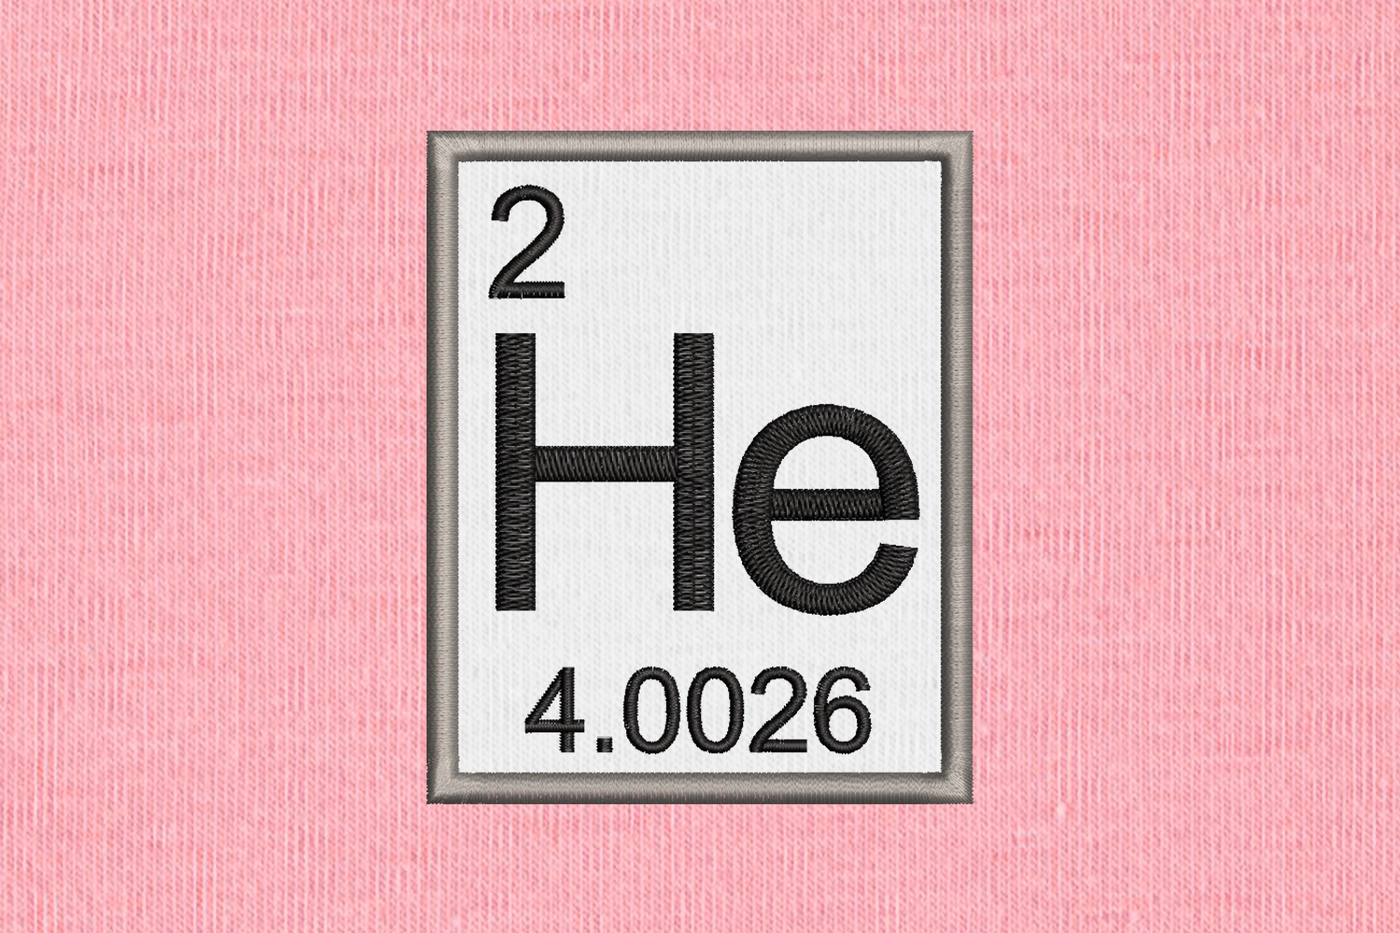 Applique design for the chemical element information for helium